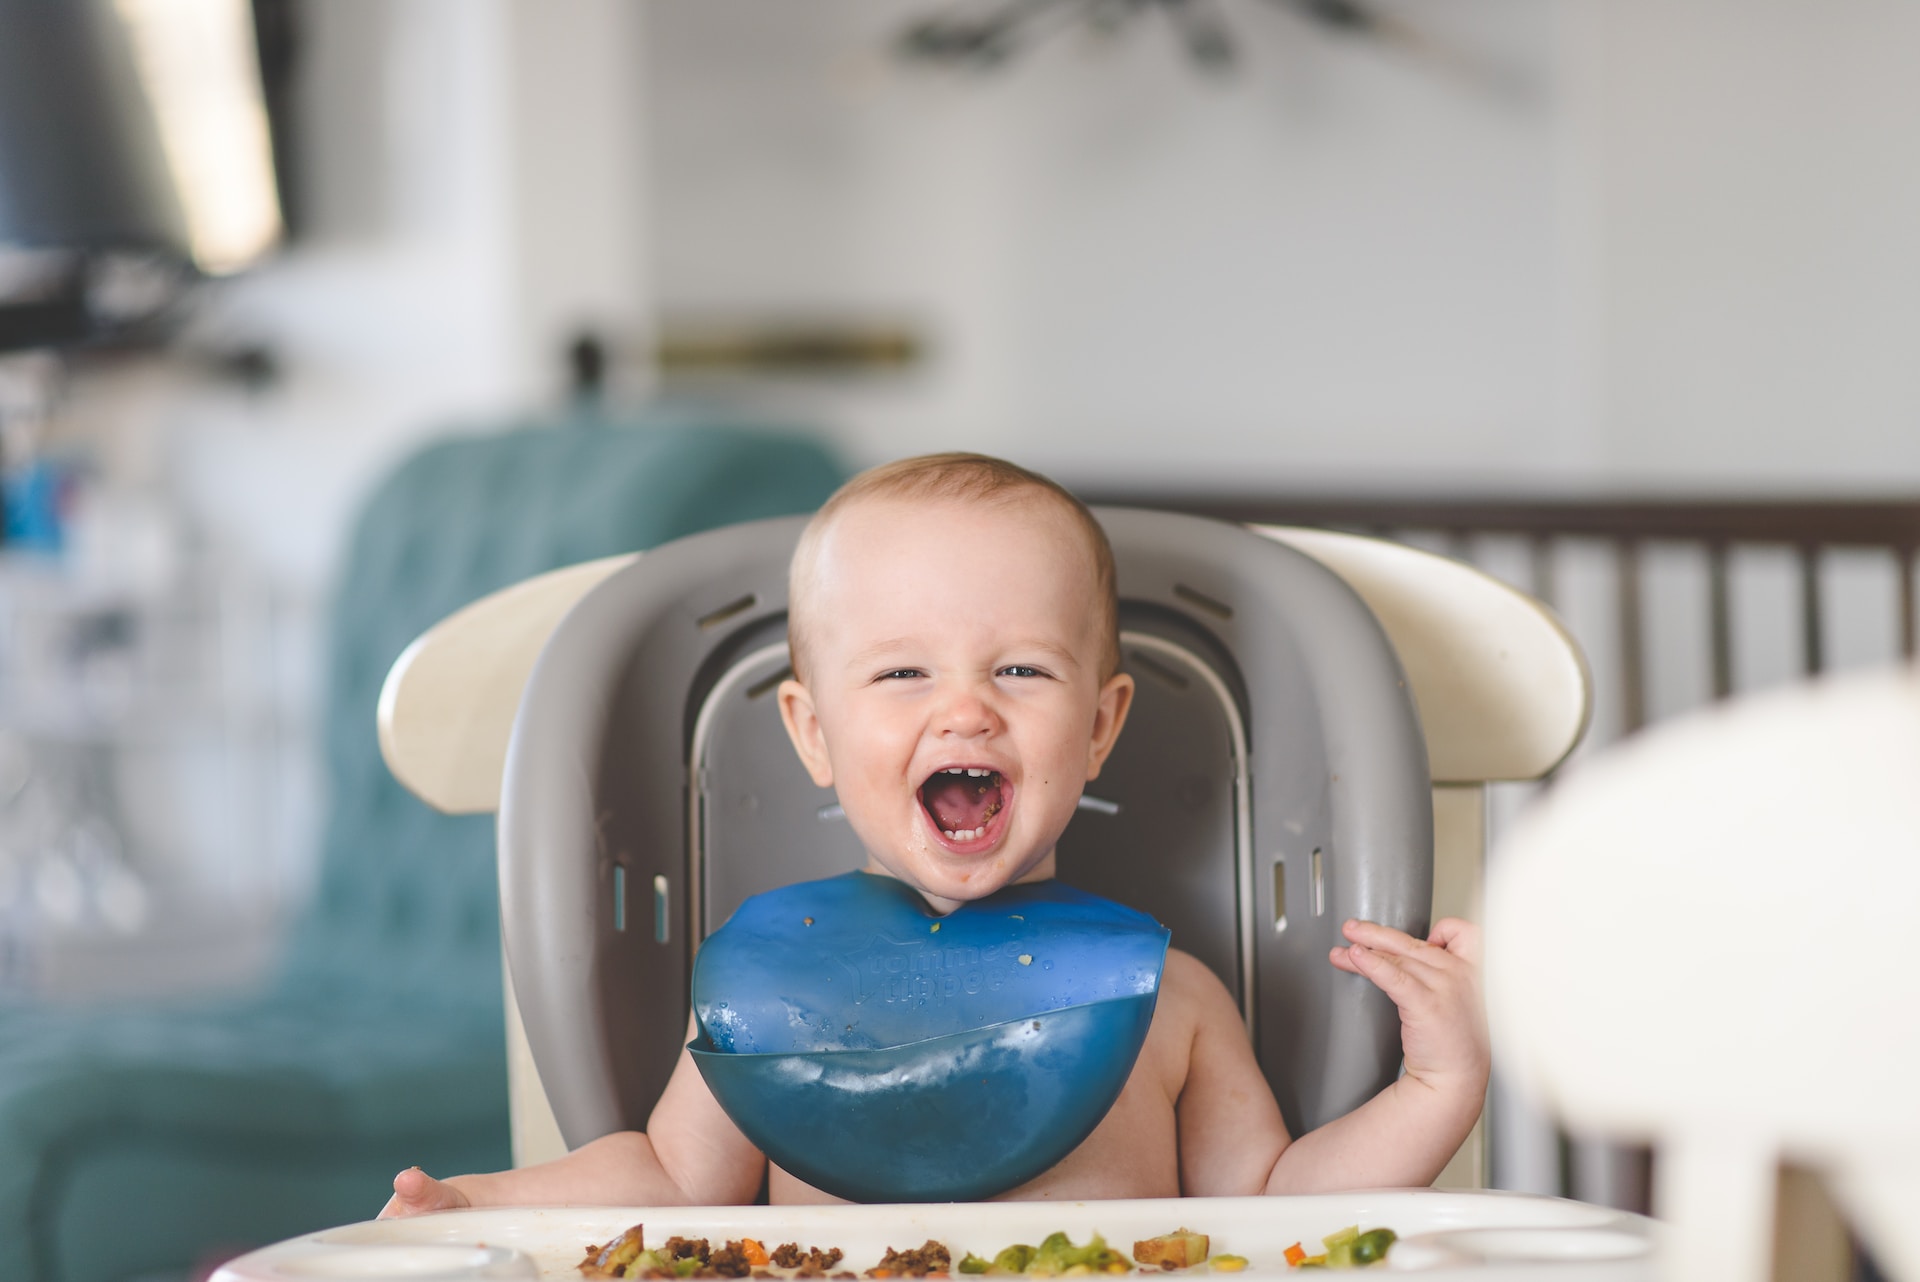 Photos shows a toddler sitting in a booster seat and eating vegetables.